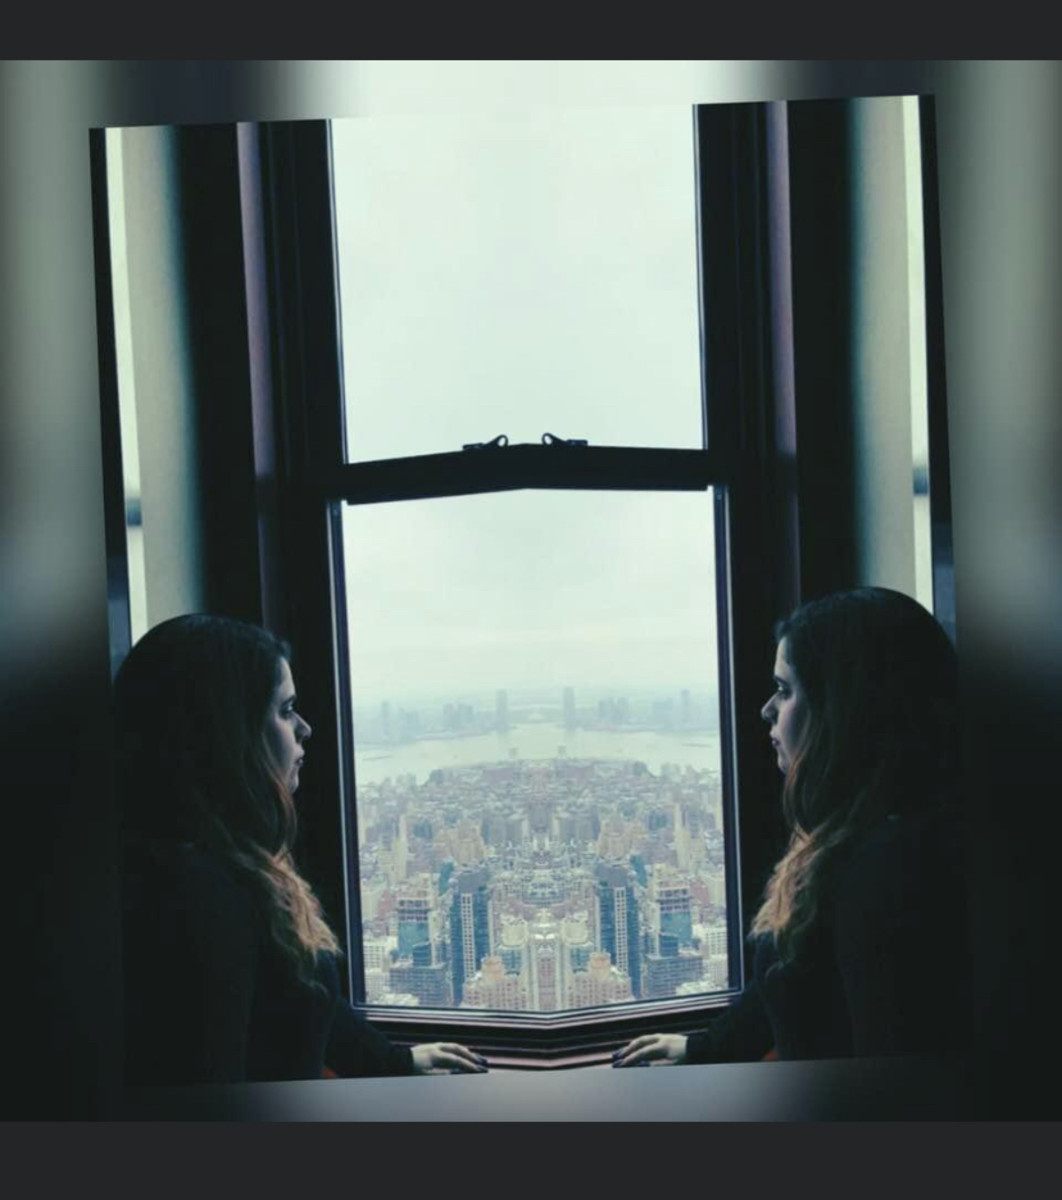 A moment in my mind at the empire state building